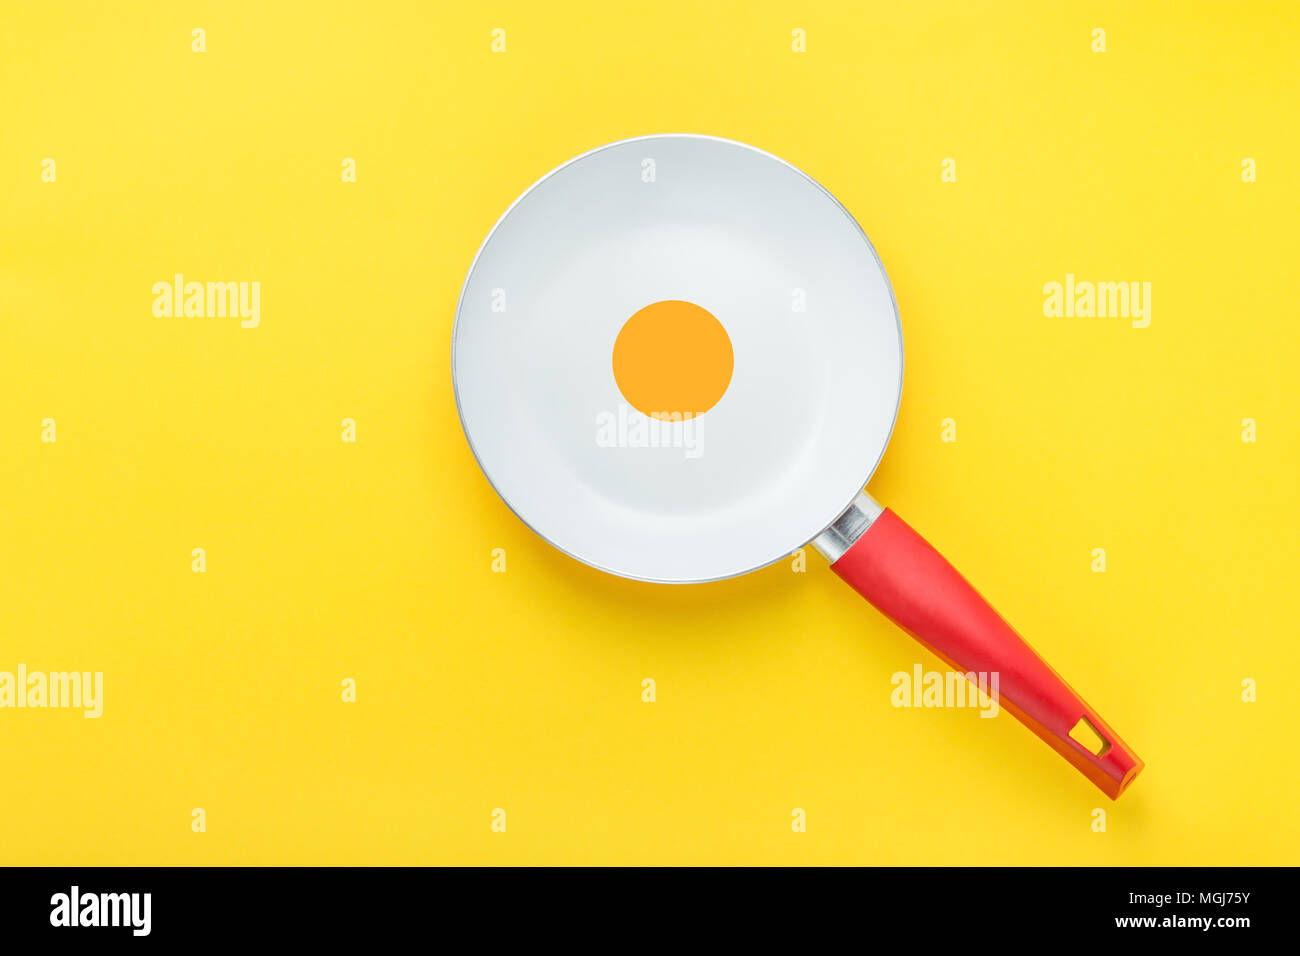 White Ceramic Frying Pan with Red Handle on Bright Yellow Background. Yolk in the Middle. Sunny Side Up Fried Eggs Collage. Creative Styled Image. Bre Stock Photo